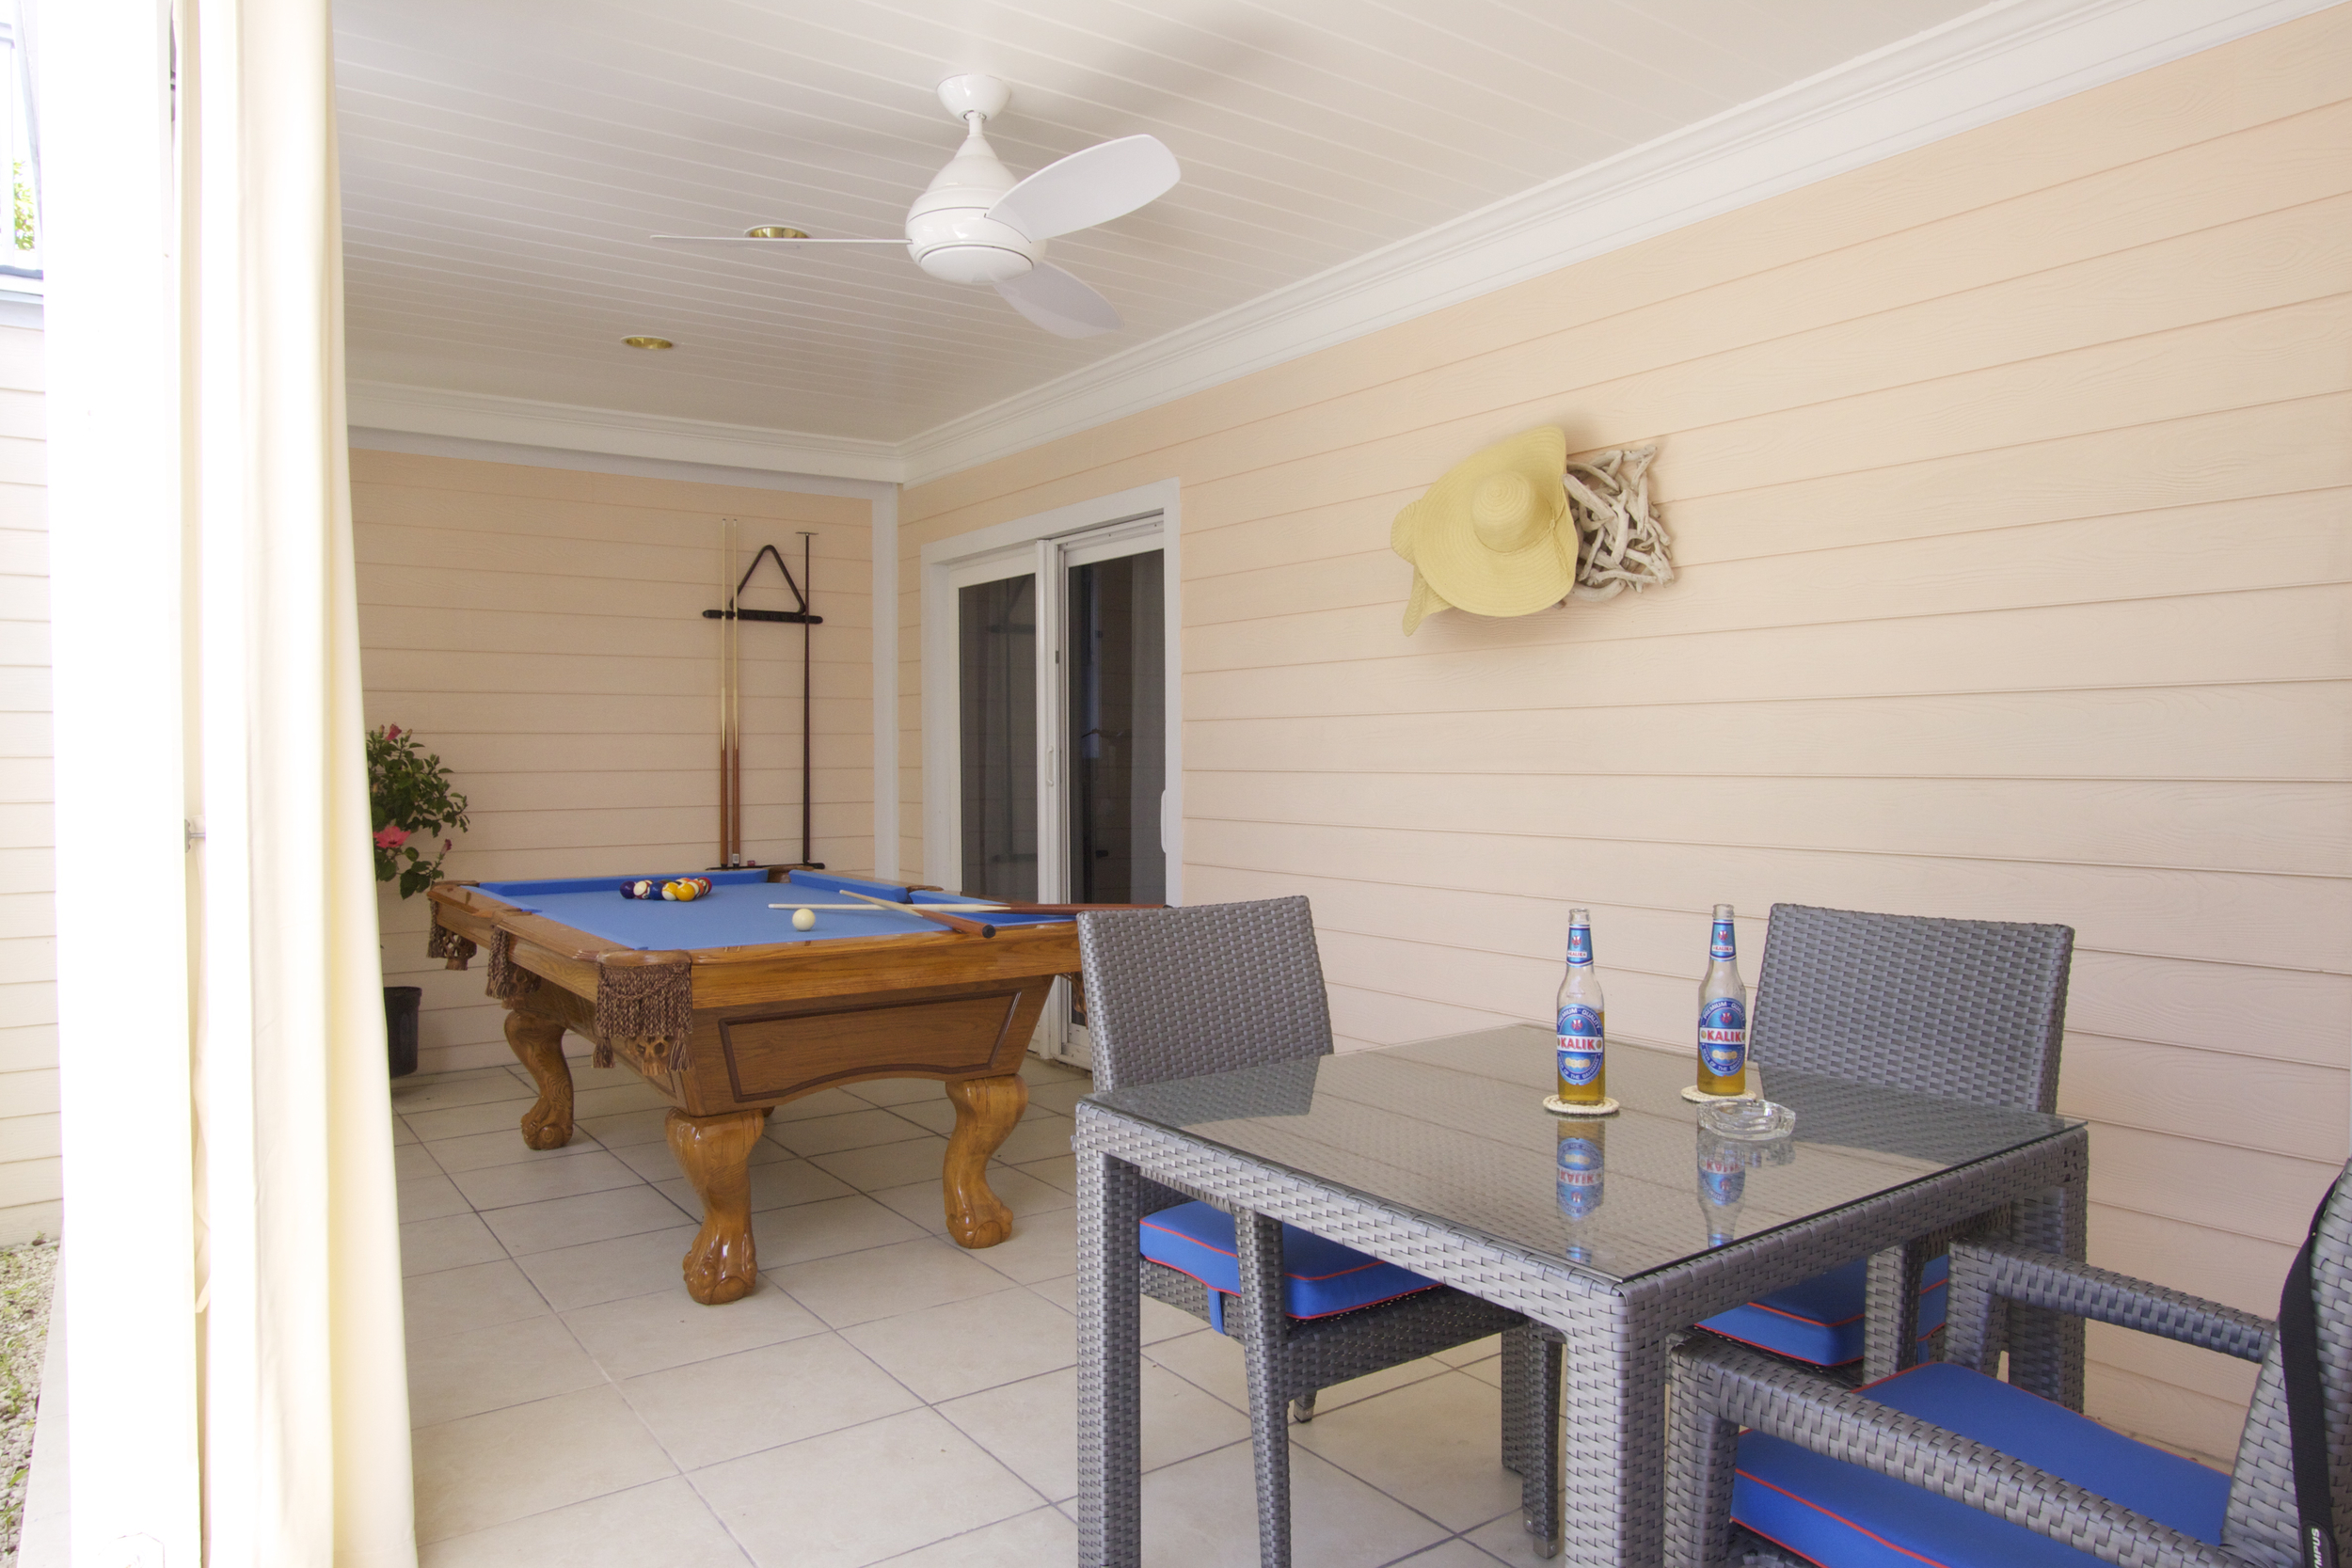 Downstairs Porch with Pool Table 4.jpg